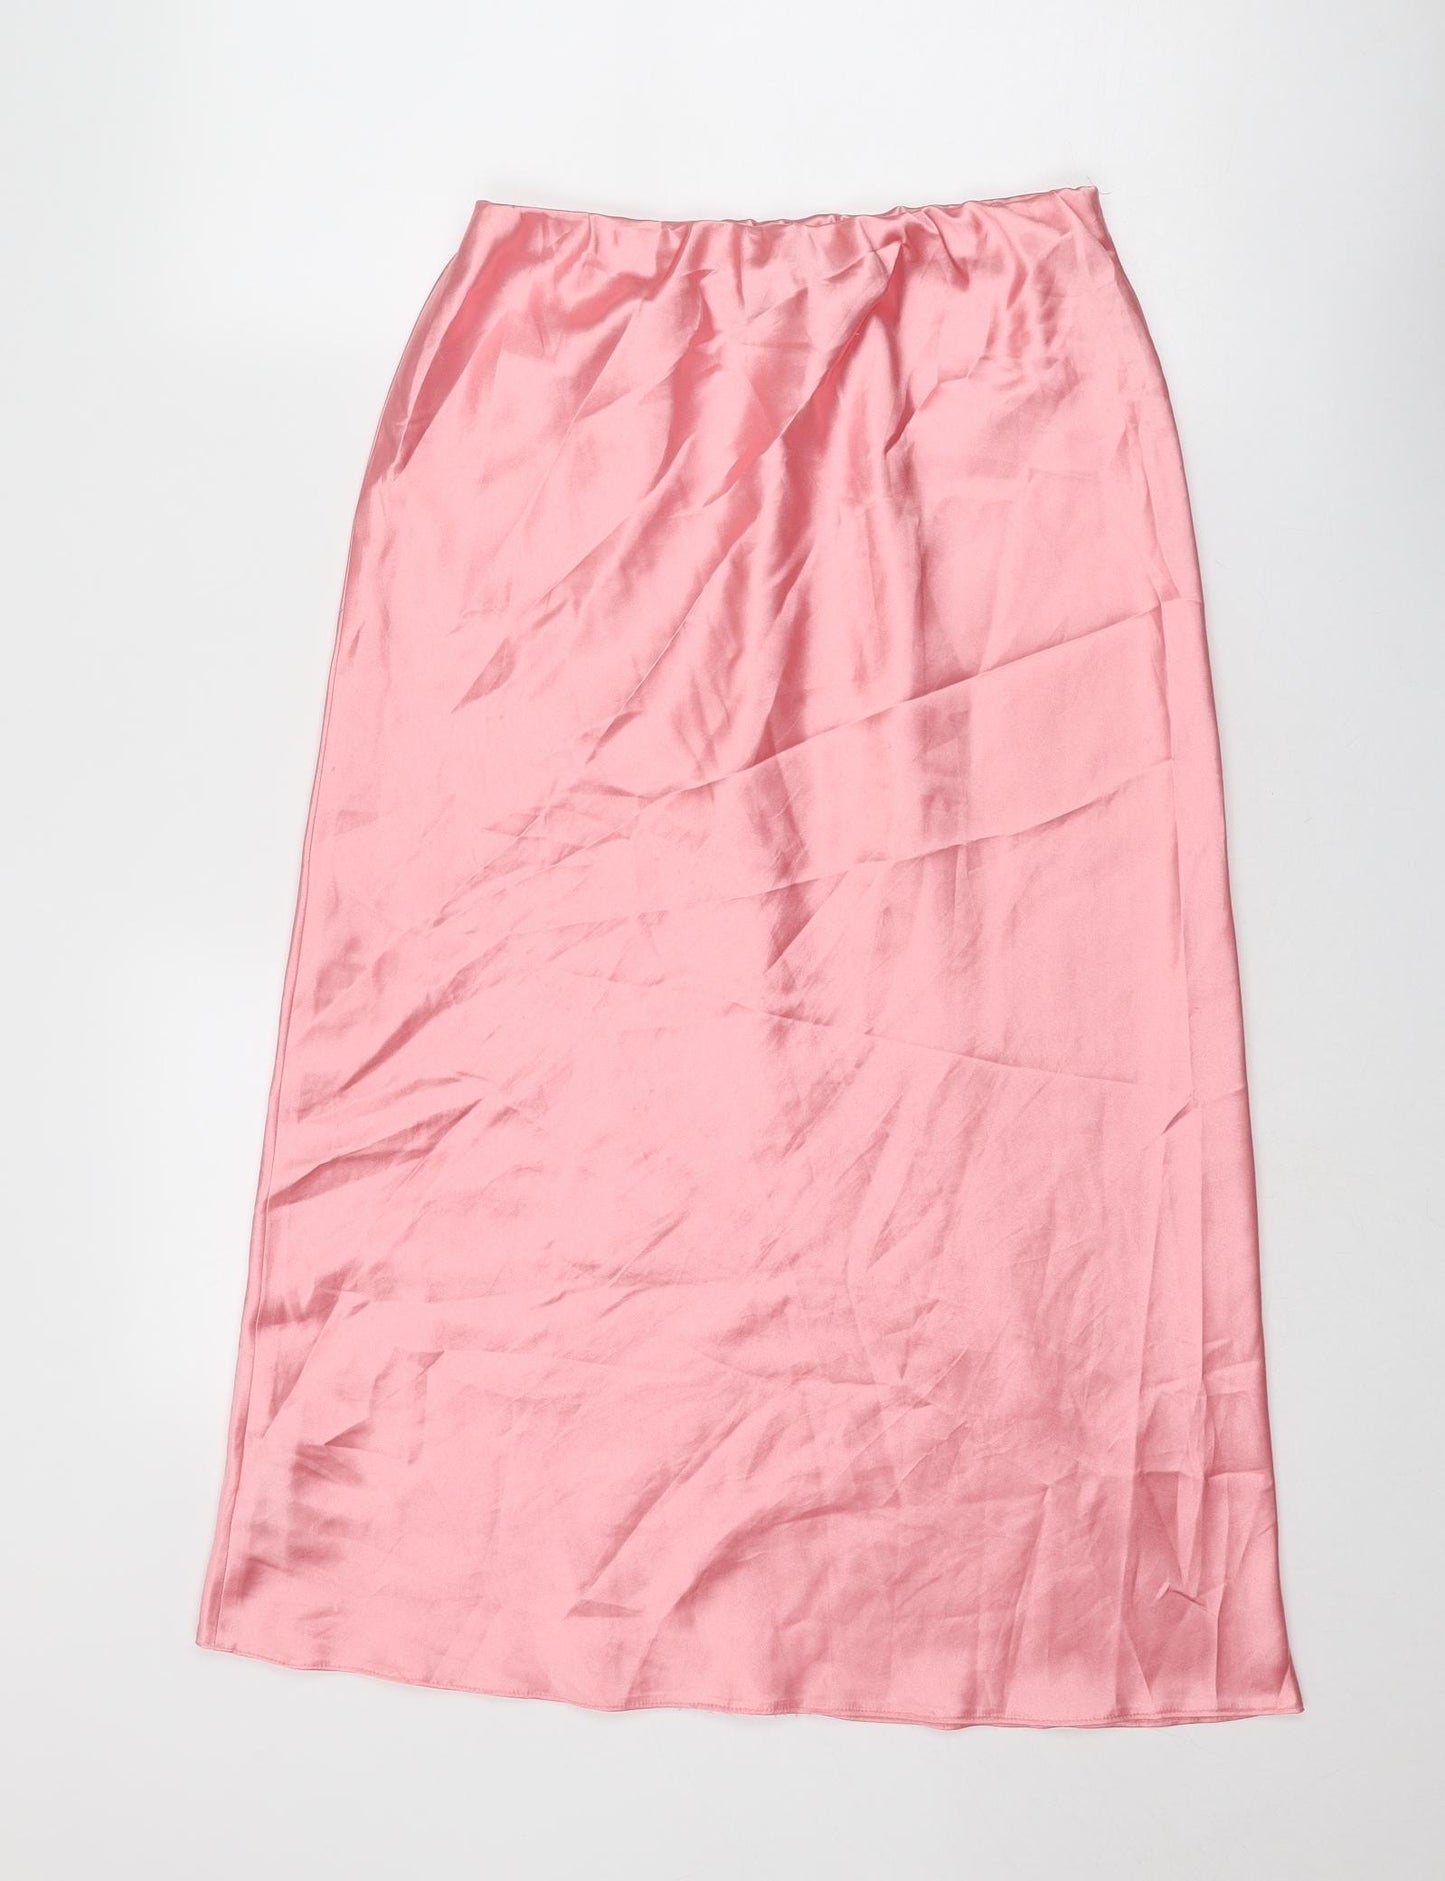 ASOS Womens Pink Polyester A-Line Skirt Size 12